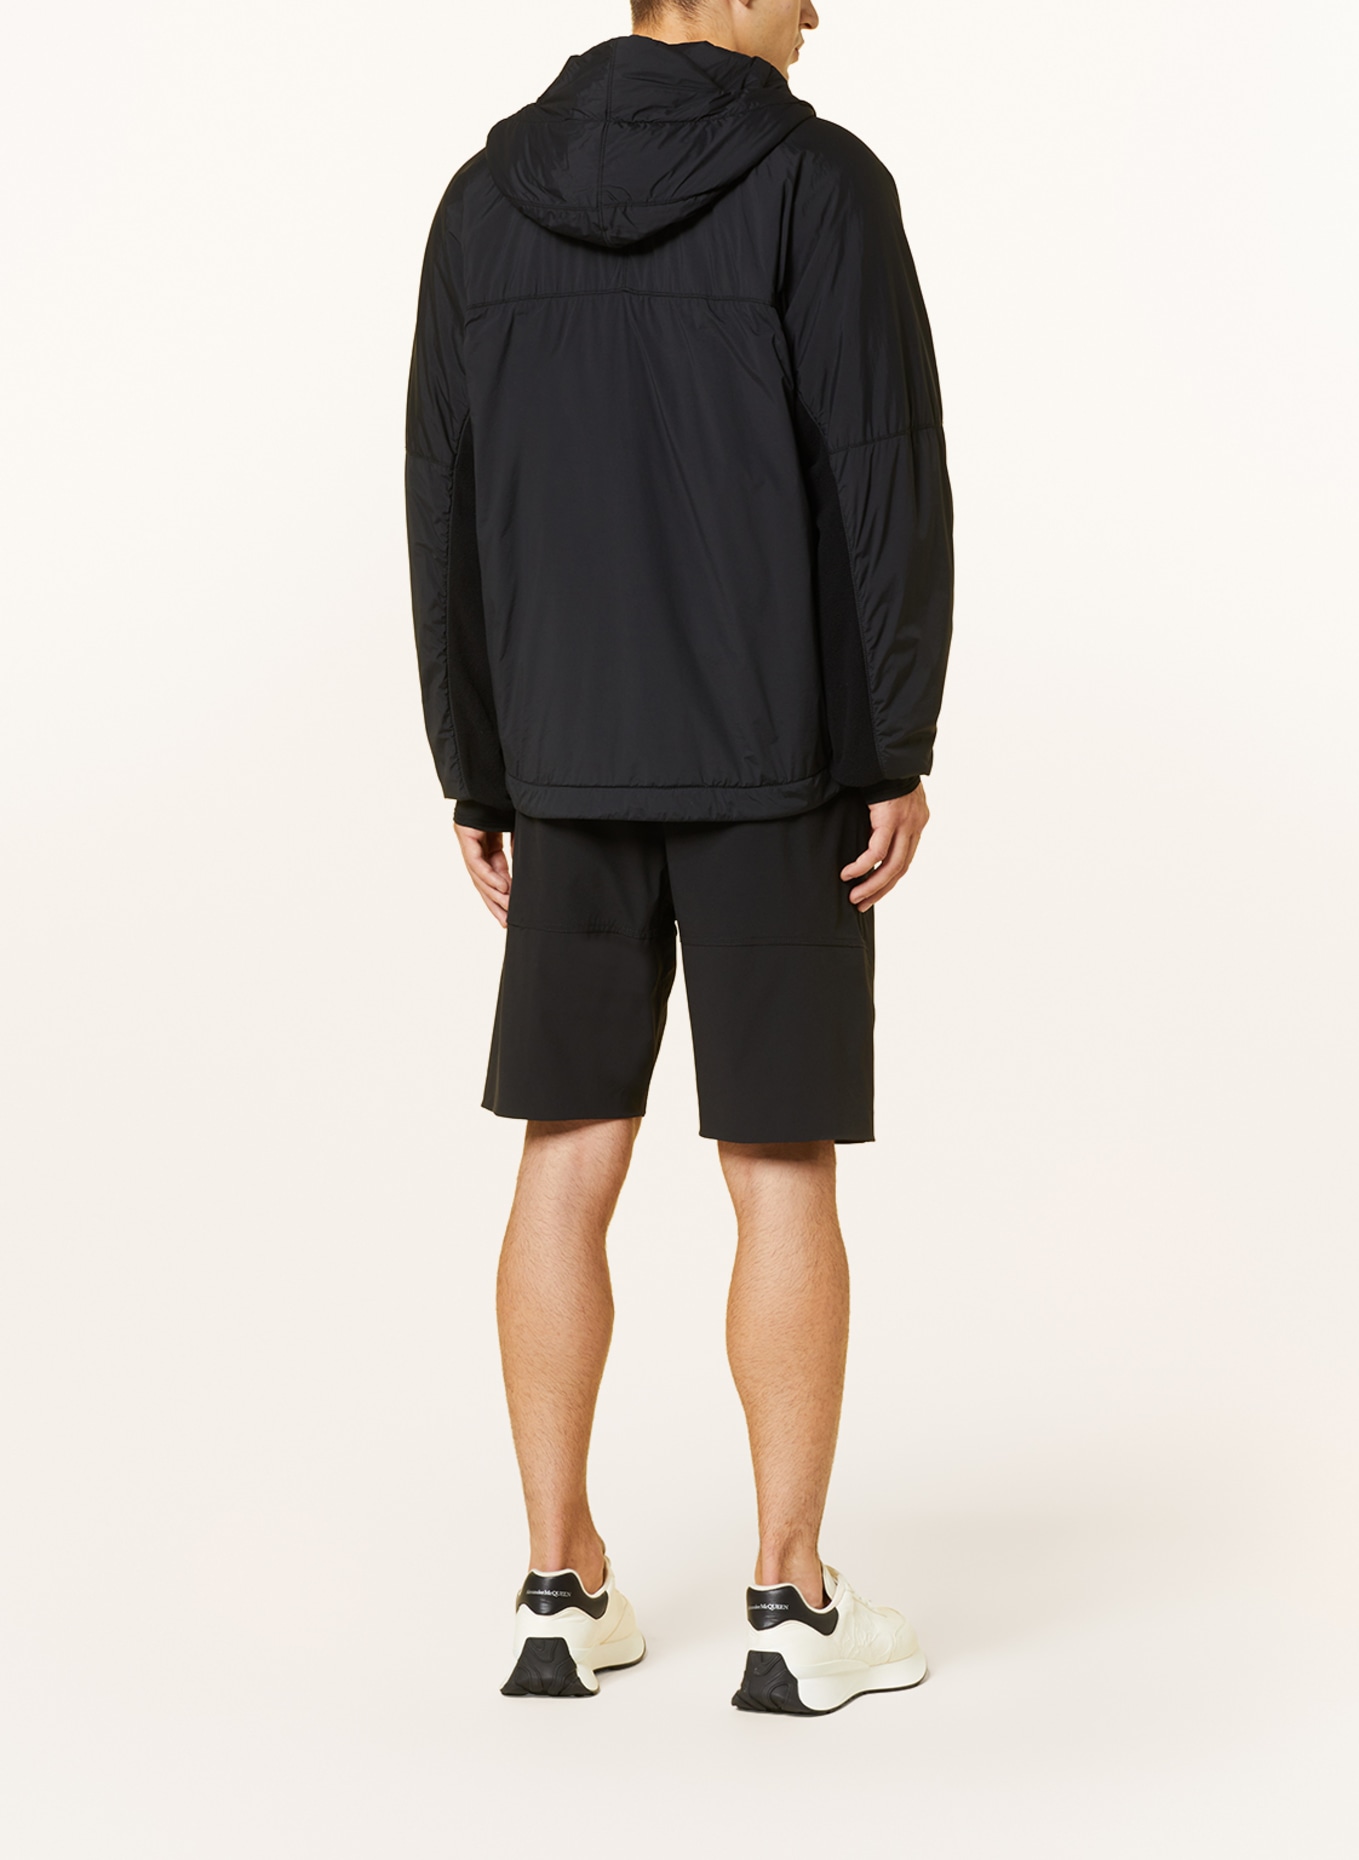 STONE ISLAND Jacket STELLINA in mixed materials, Color: BLACK (Image 3)